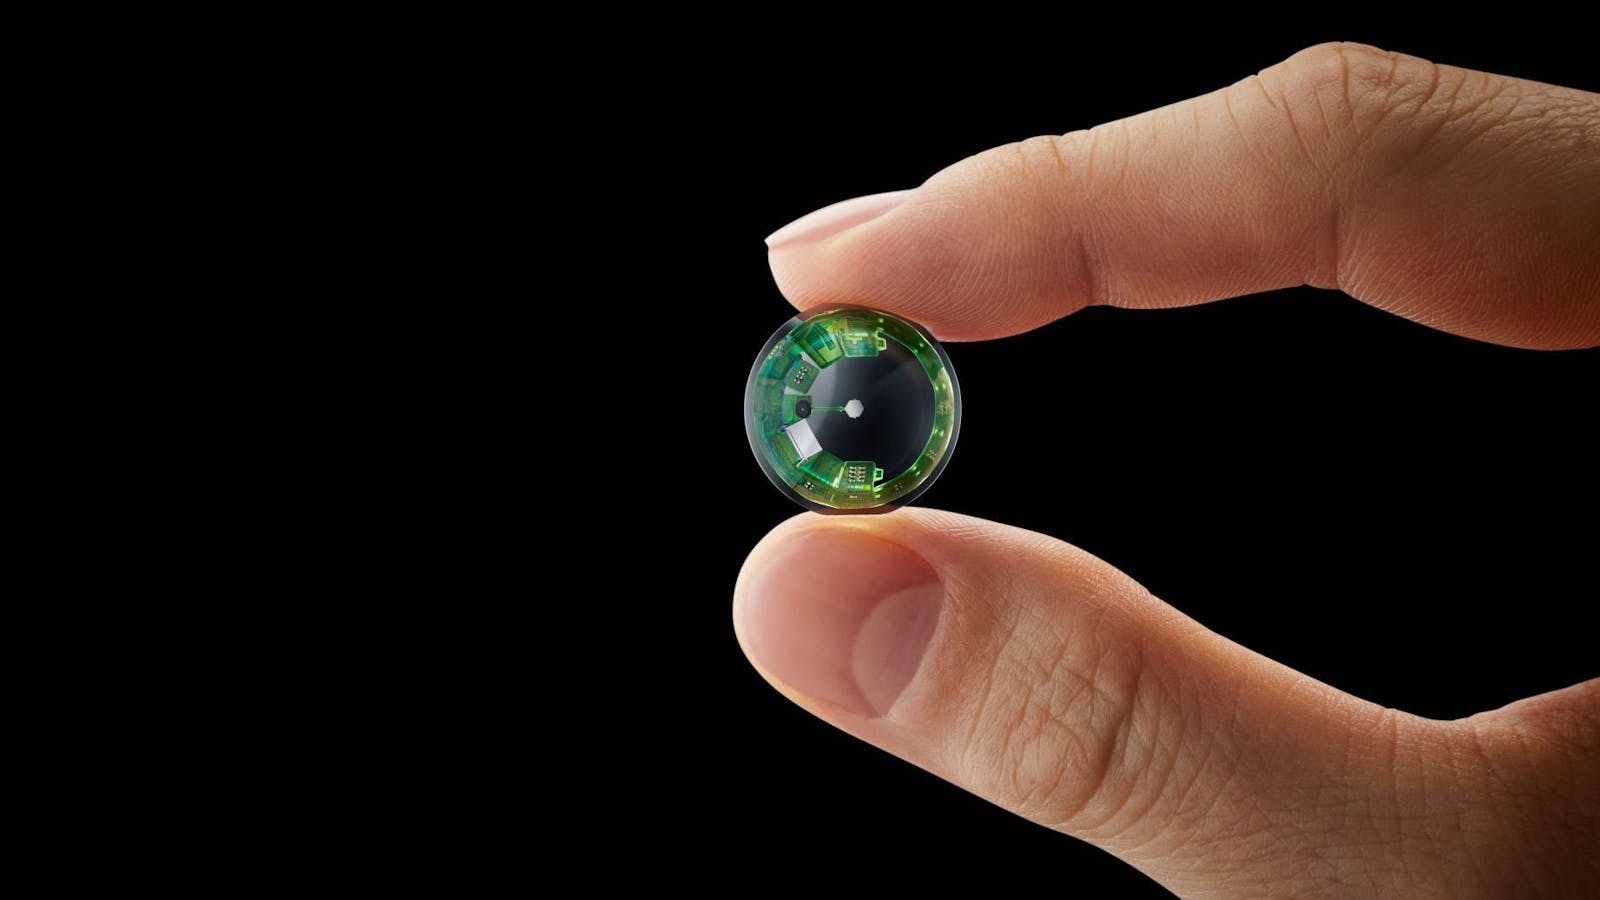 The new prototype from Mojo, a hard contact lens with a display, sensors, radio, and batteries. Photo: Mojo Vision.